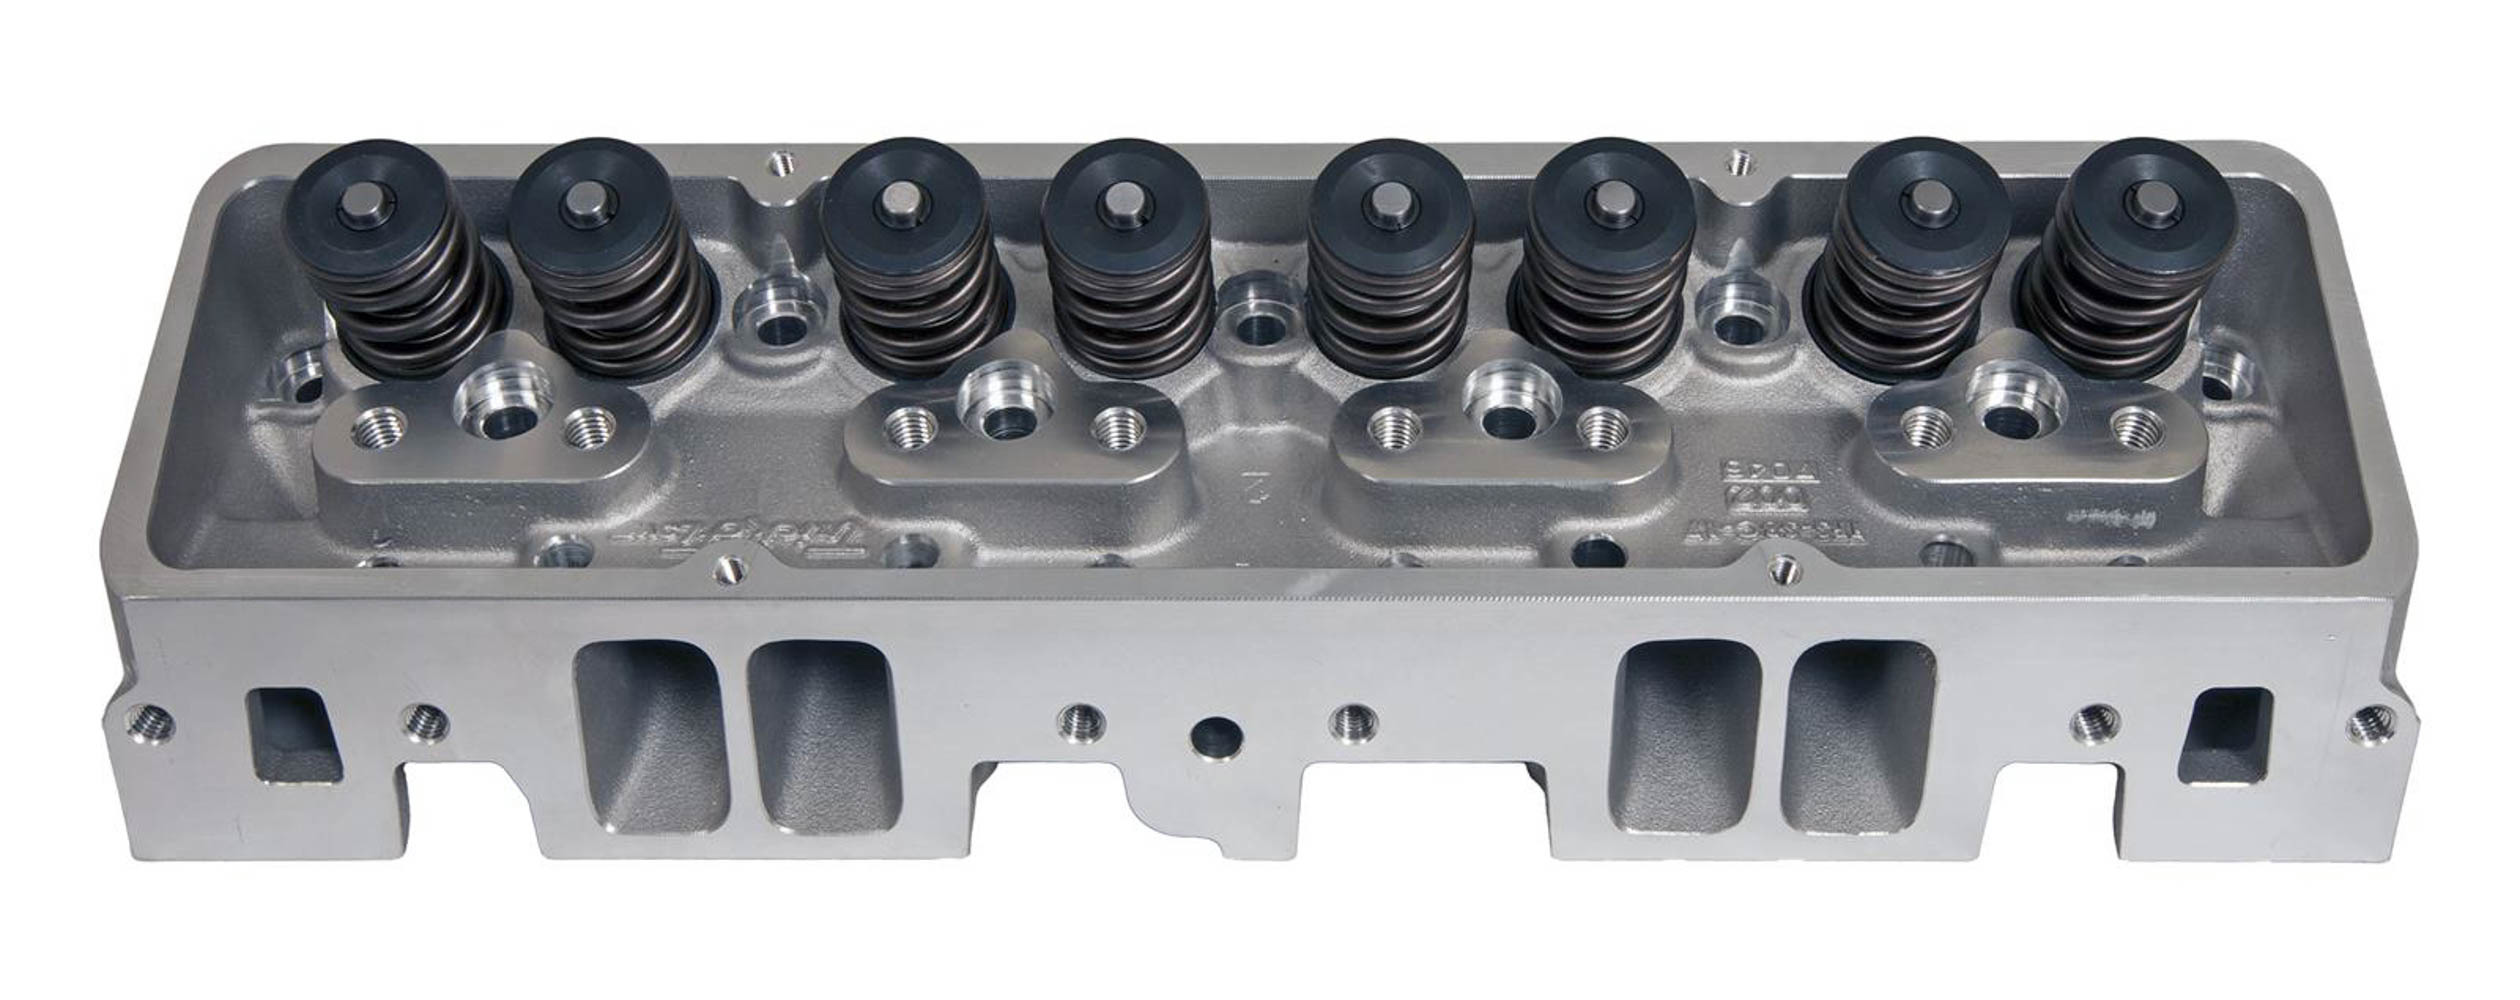 Trick Flow TFS-30210002 Cylinder Head, DHC, Assembled, 2.020 / 1.600 in Valves, 175 cc Intake, 60 cc Chamber, 1.470 in Springs, Straight Plug, Aluminum, Small Block Chevy, Each